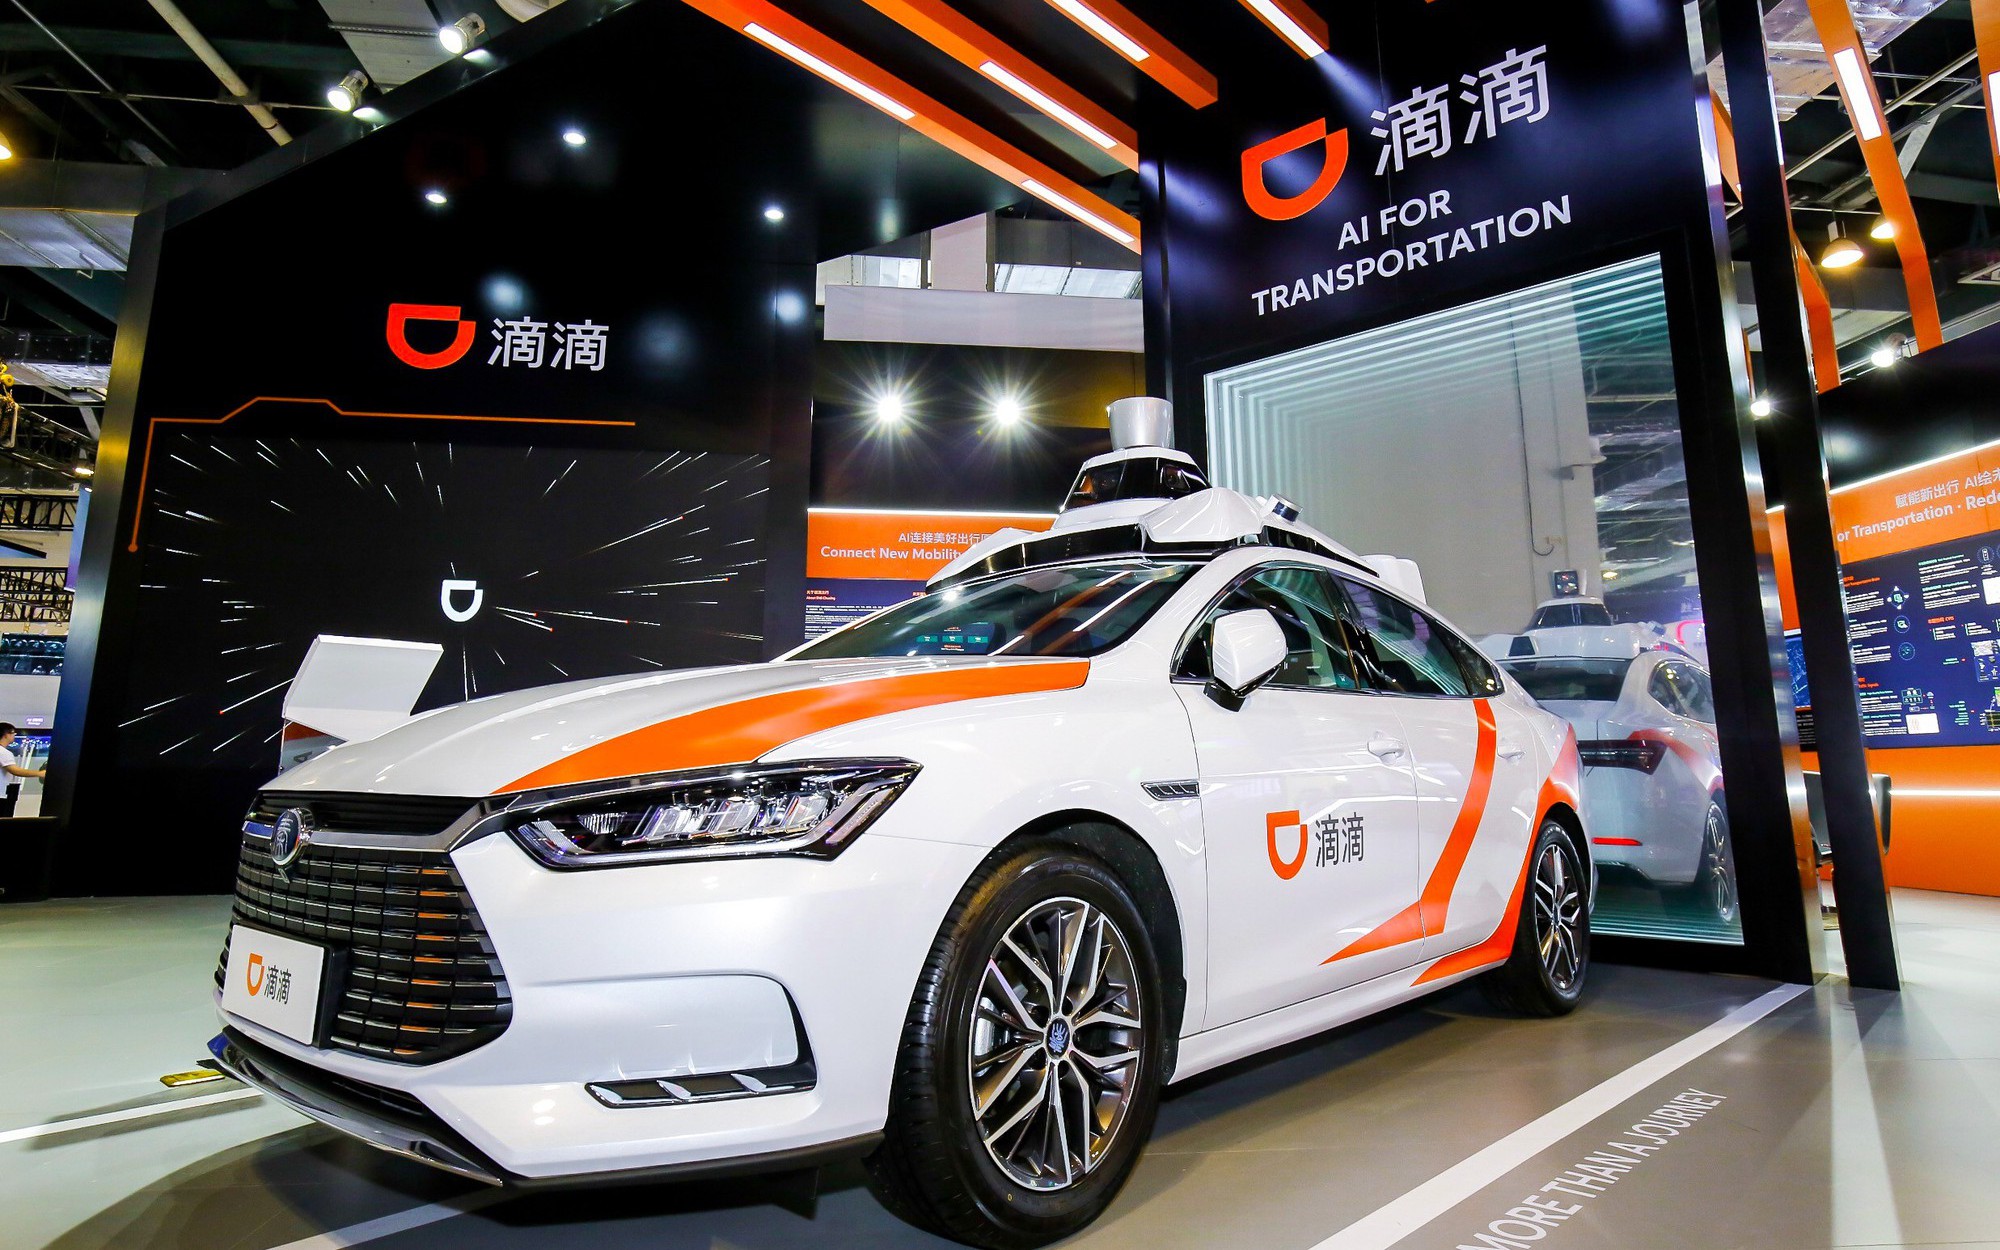 Where do the US and China stand in the race for self-driving cars?